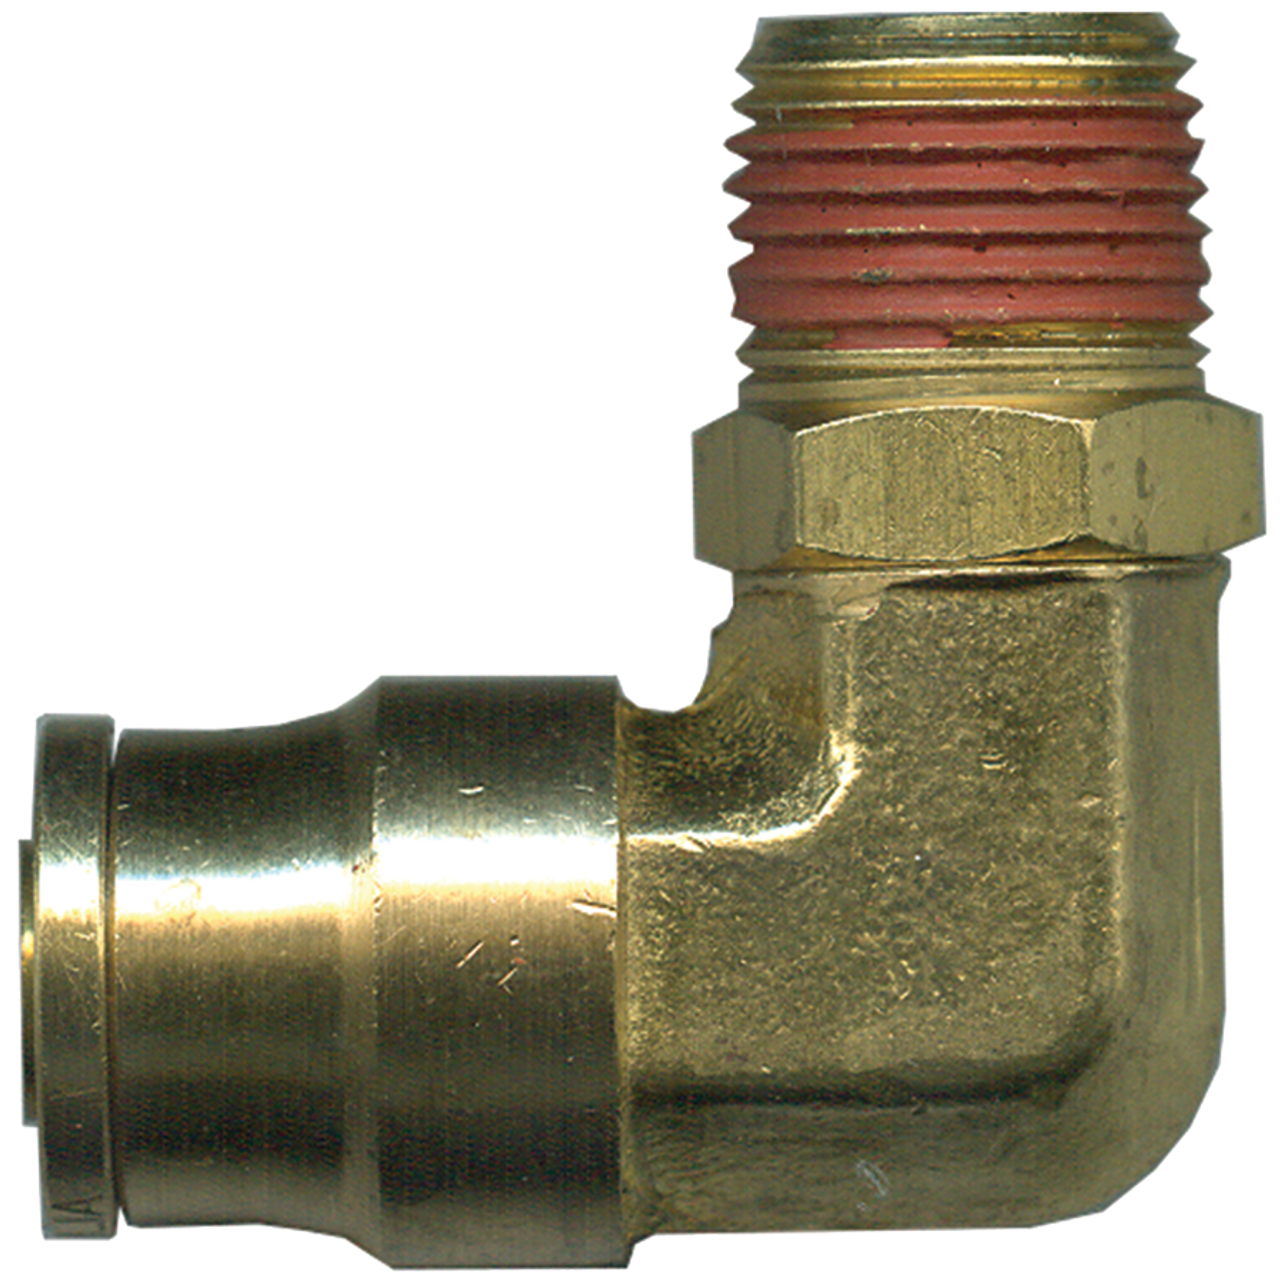 3/4 x 1/2" Brass DOT Push-To-Connect - Male NPT Swivel 90° Elbow  PC1469SW-12D